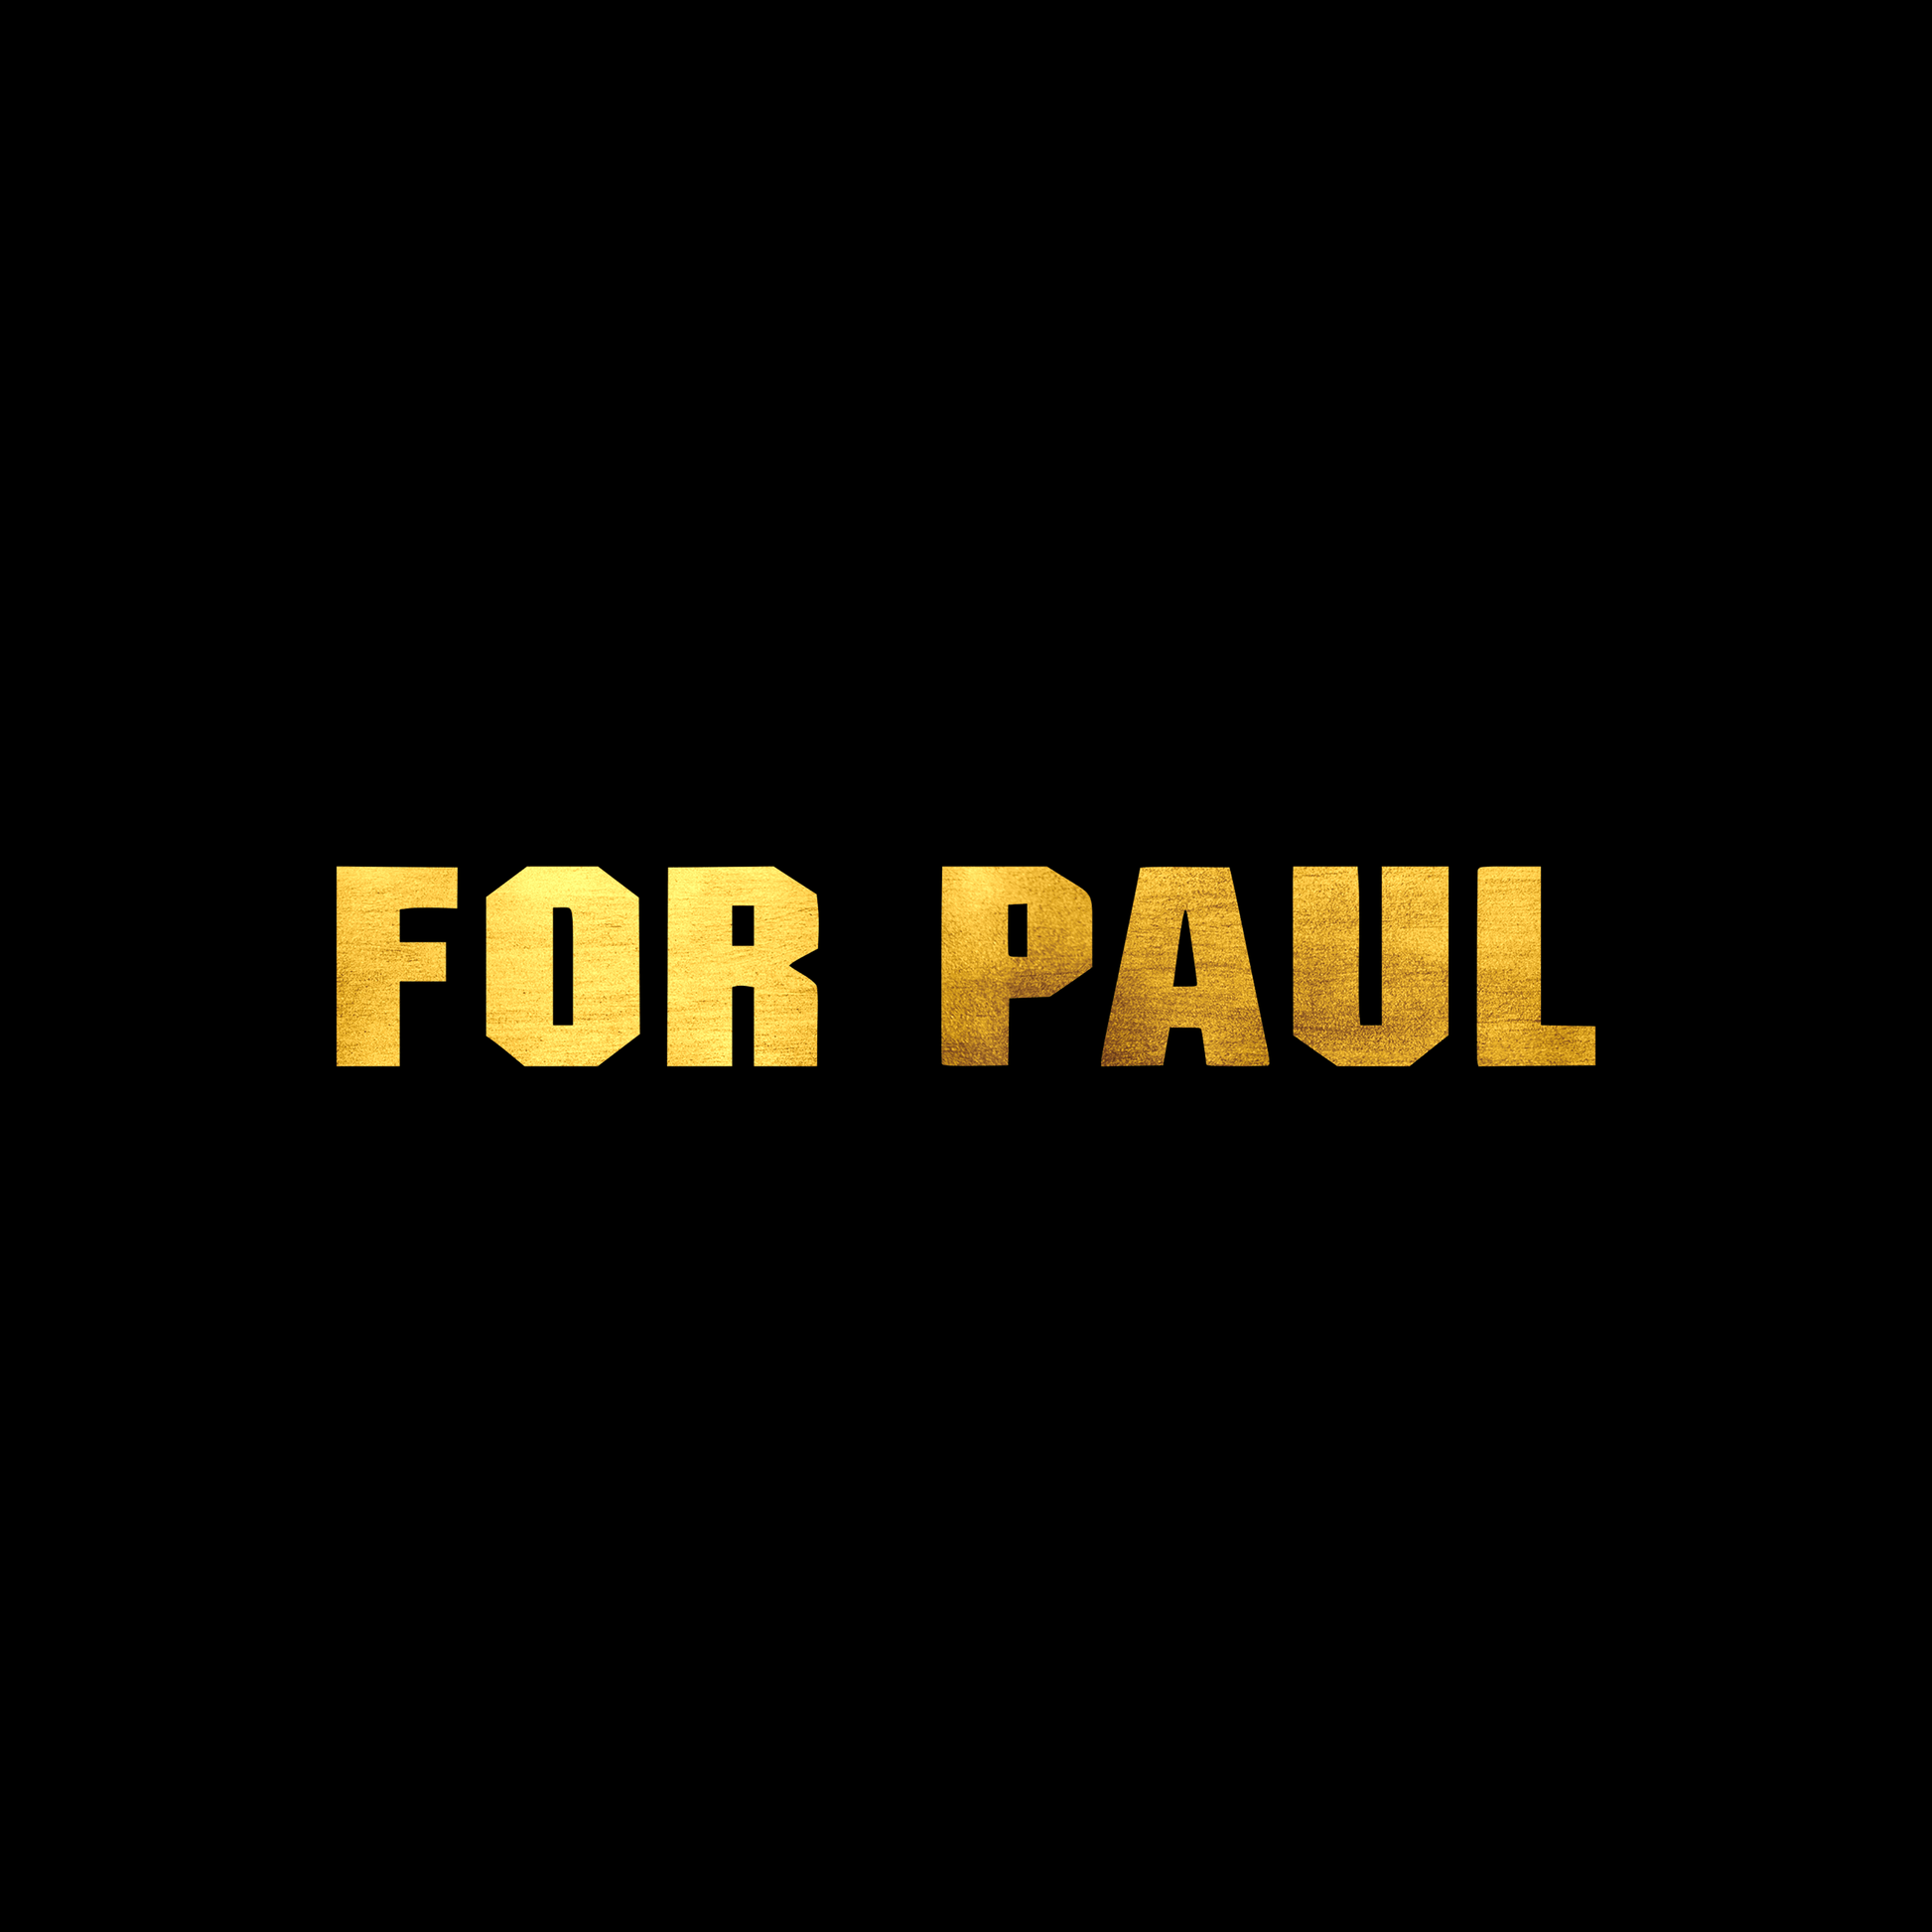 For paul sticker decal